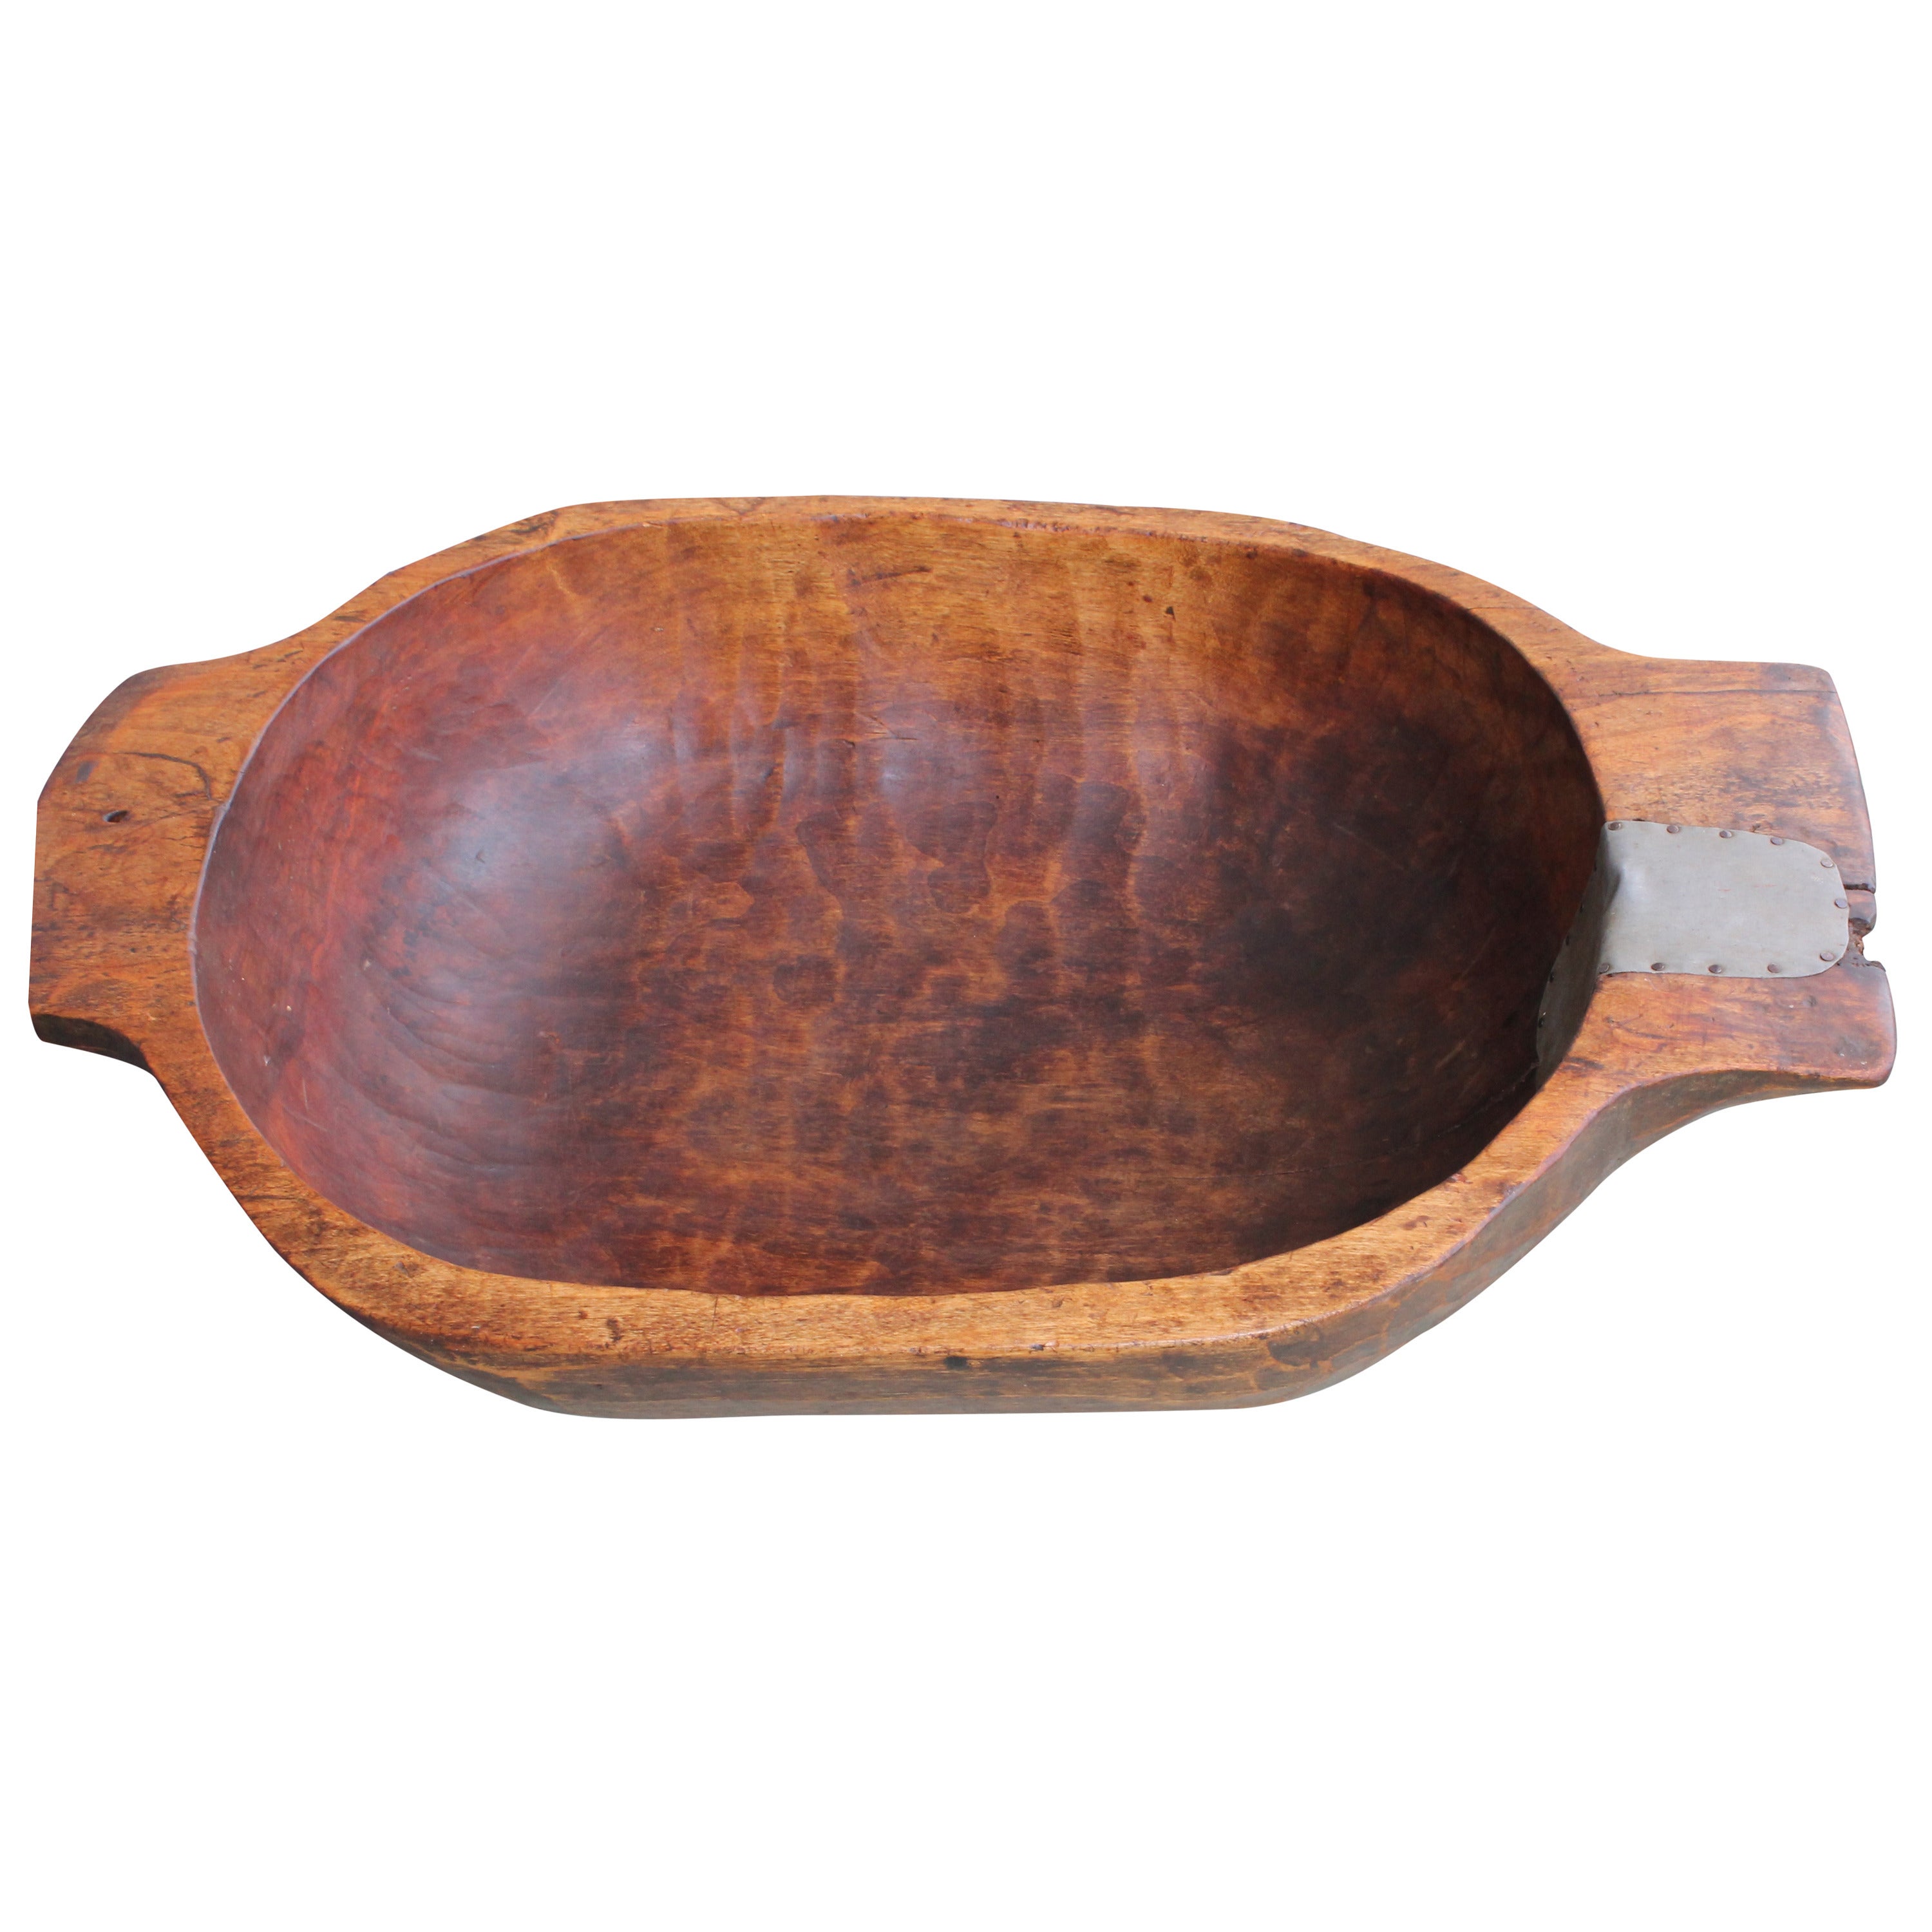 Fantastic Monumental Double Handled Round 19th Century Dough Bowl For Sale